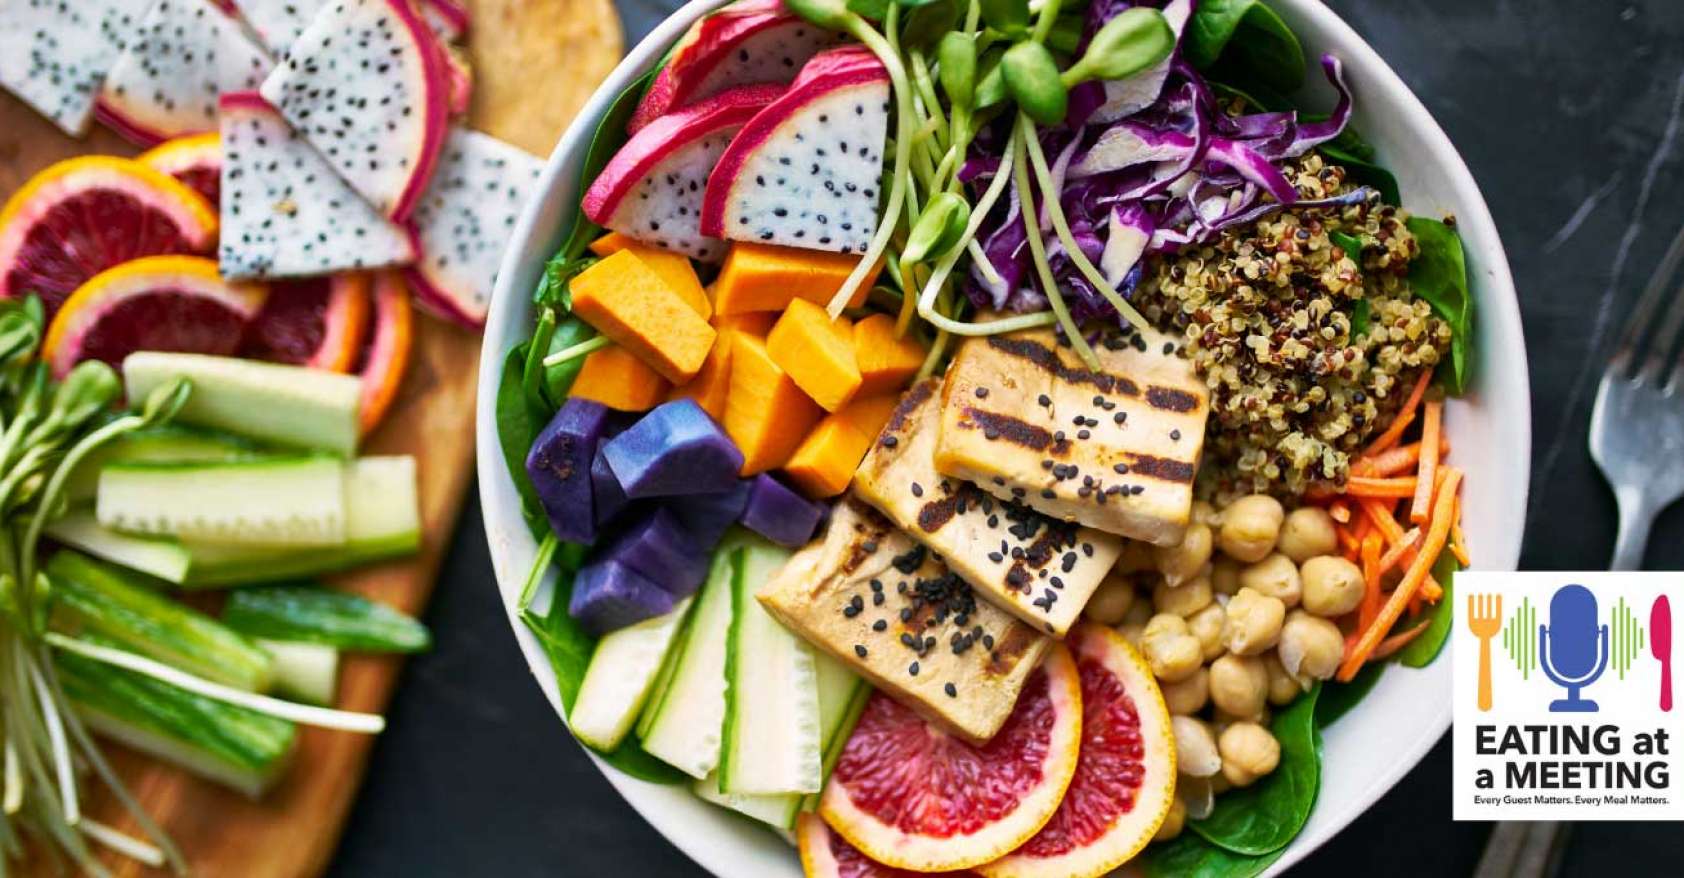 Looking down on a bowl of plant-based food with vegan sides on a wooden board